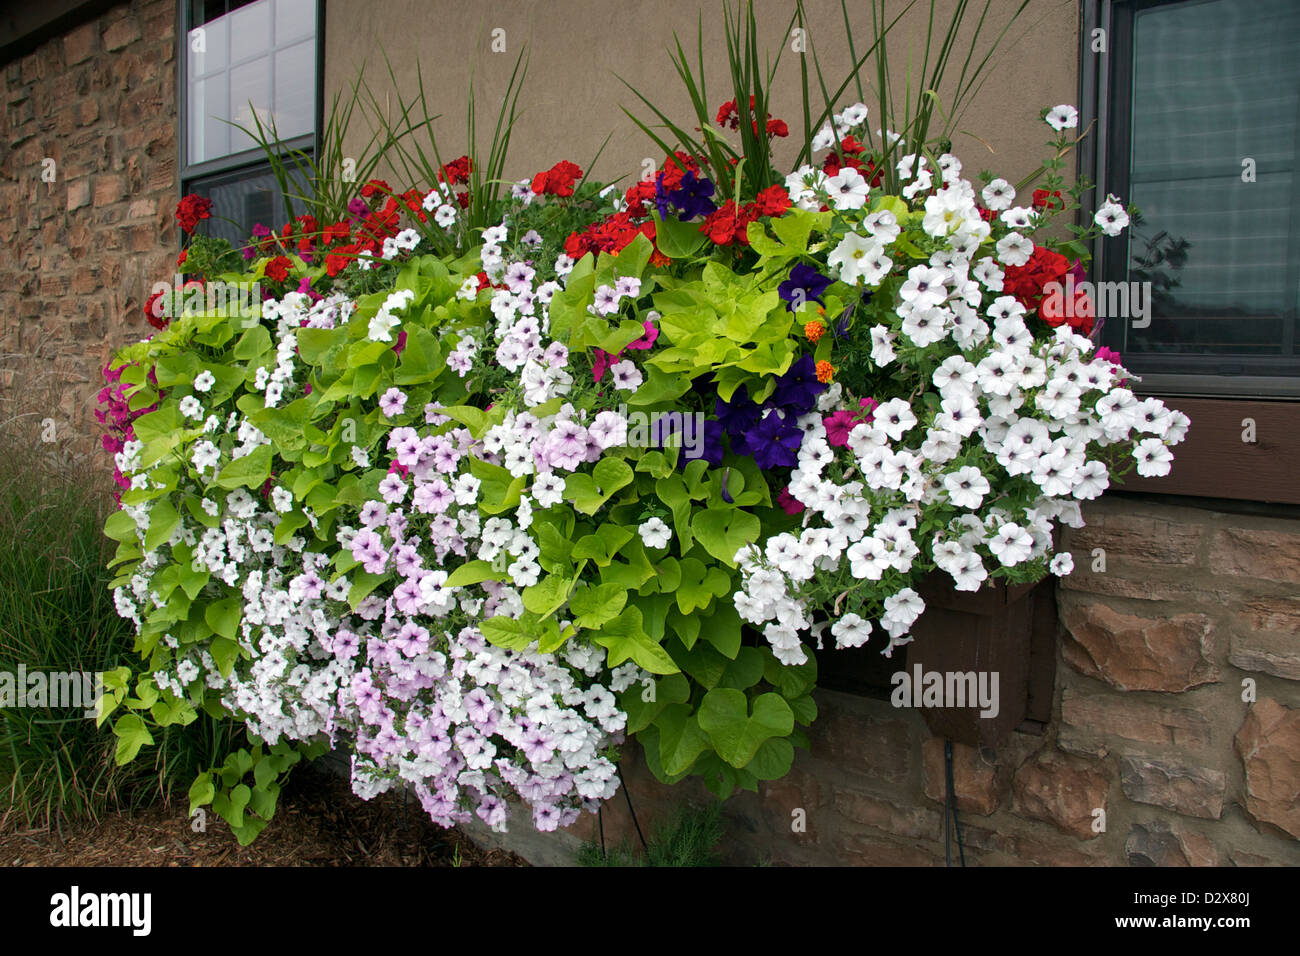 A planter box filled with annuals Stock Photo